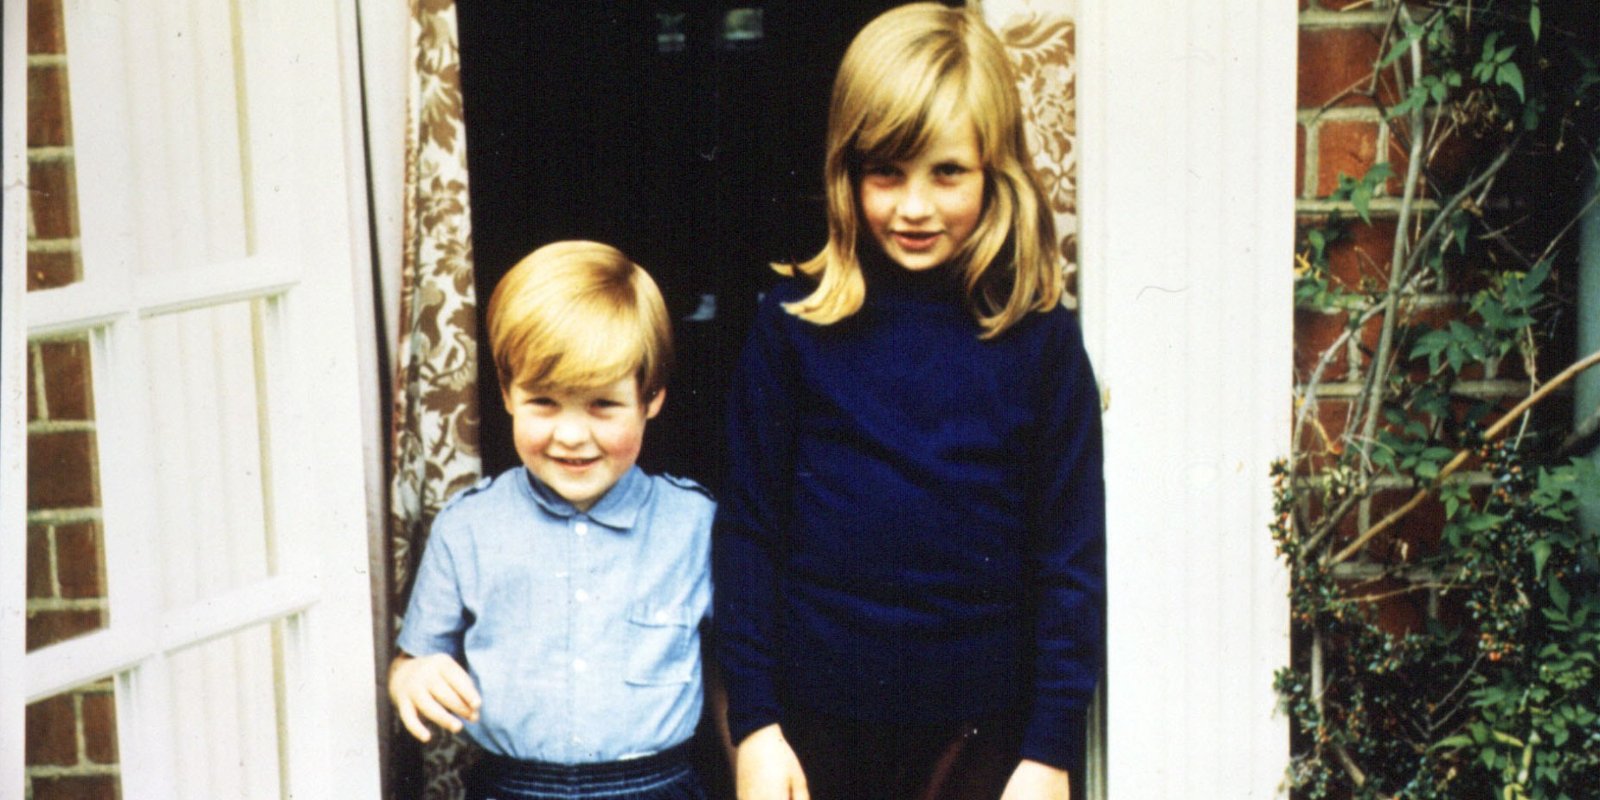 Princess Diana and her brother Charles, photographed in 1968.